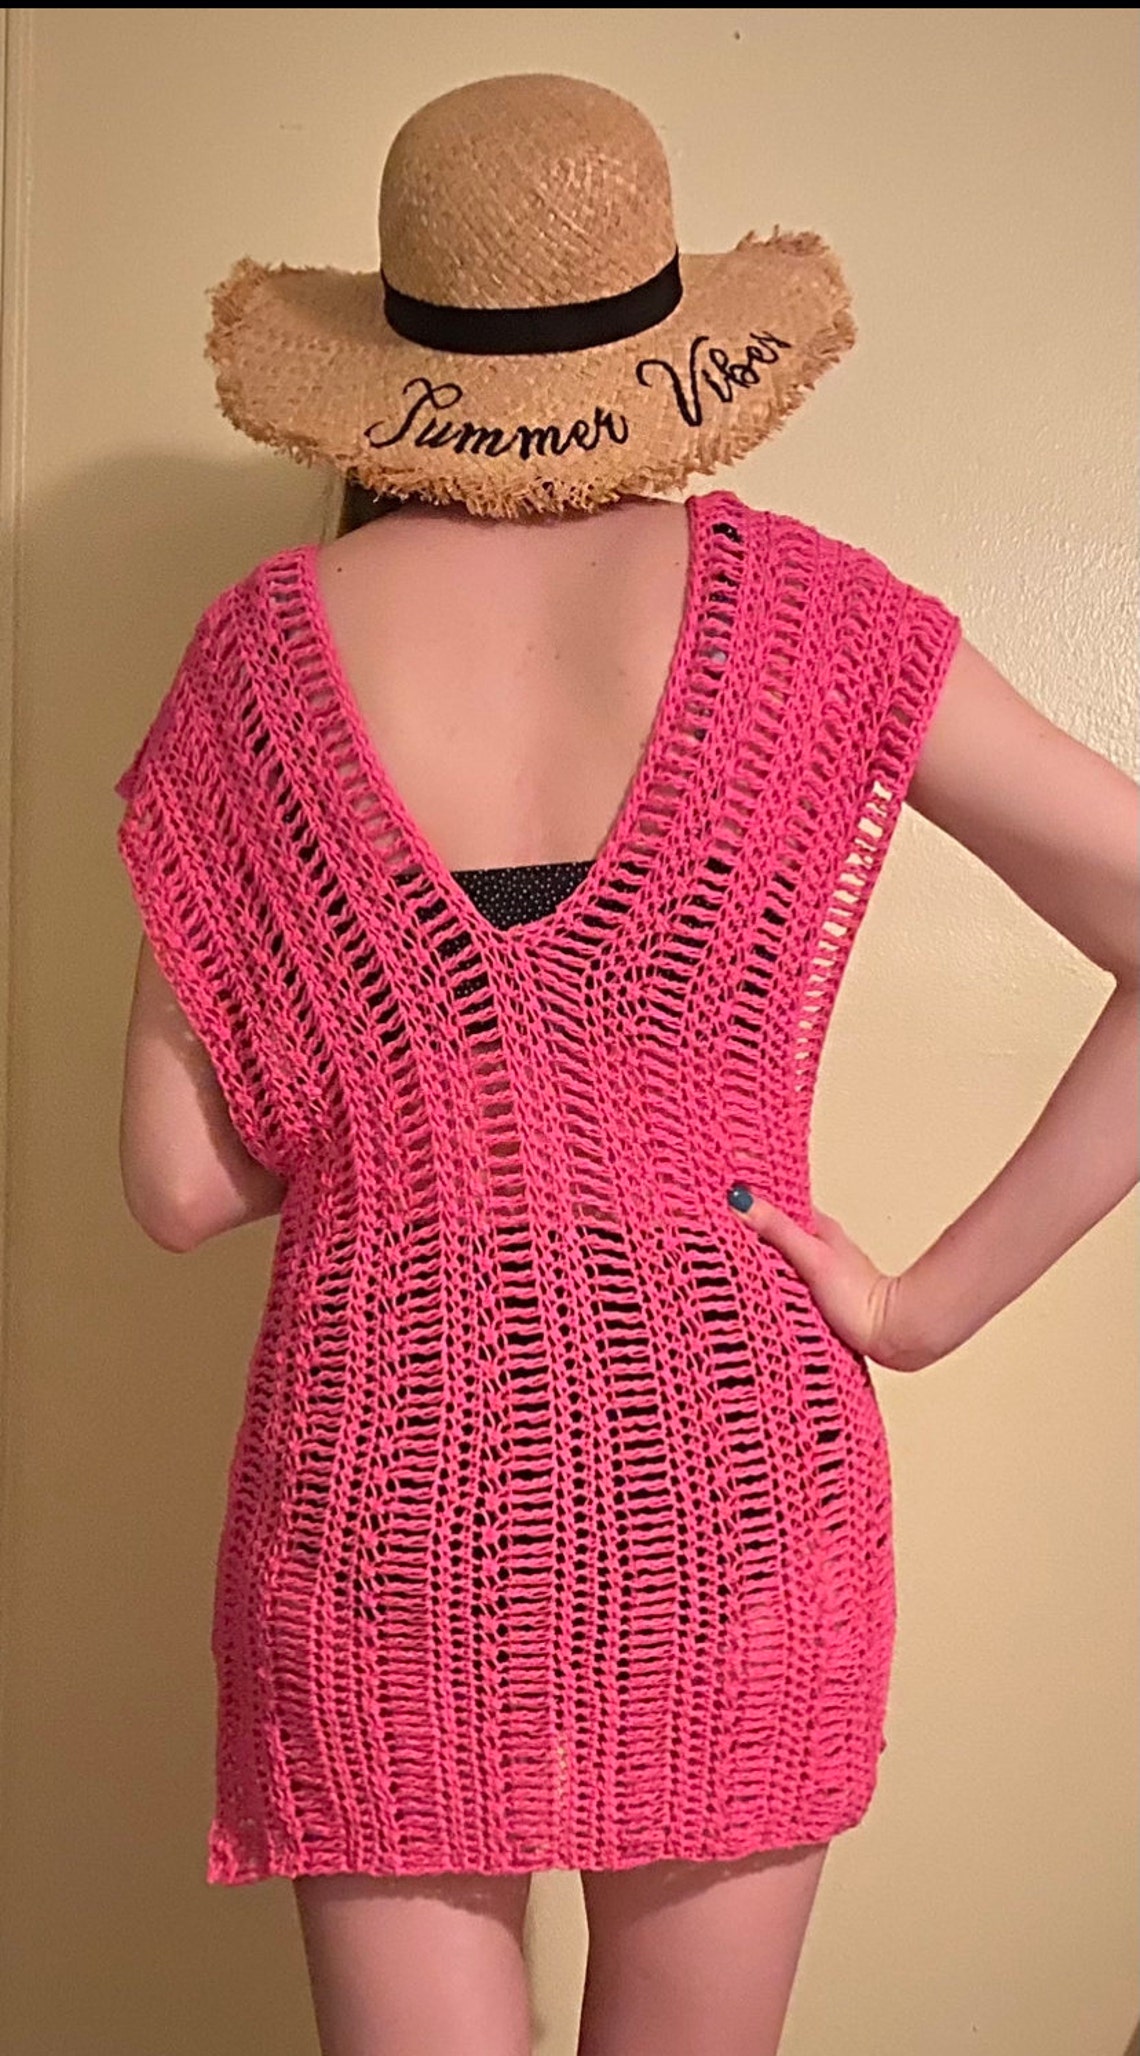 Hot Pink Summer Cover Up Standard Swimsuit Cover Up Beach | Etsy